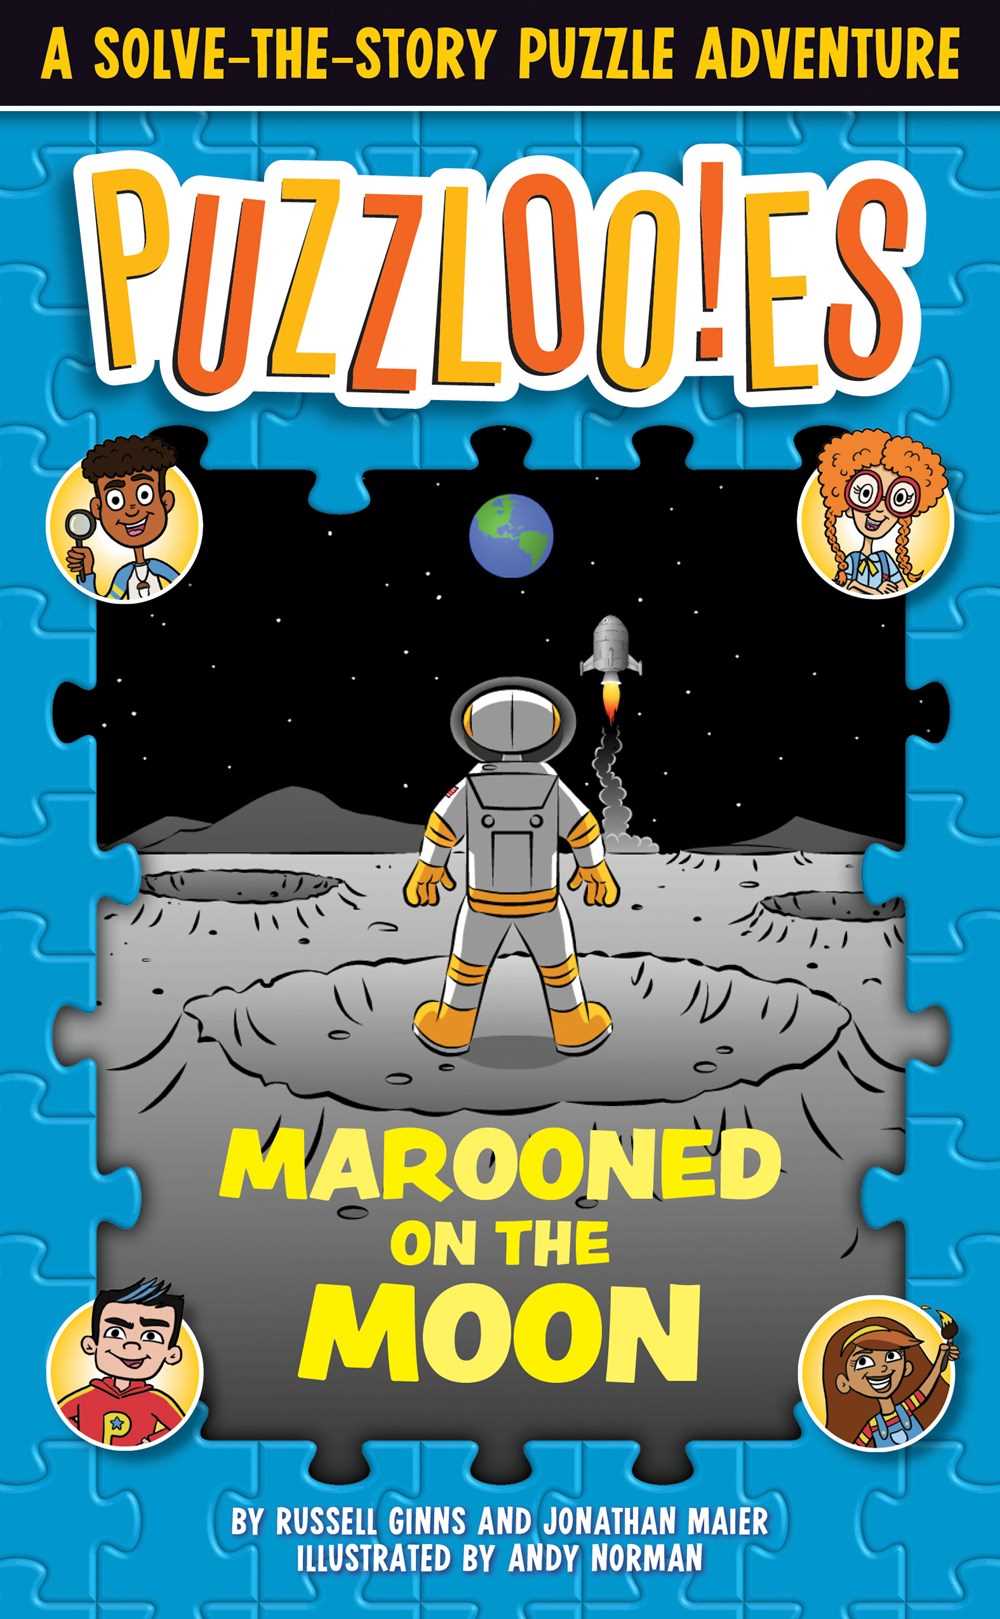 Marooned on the Moon